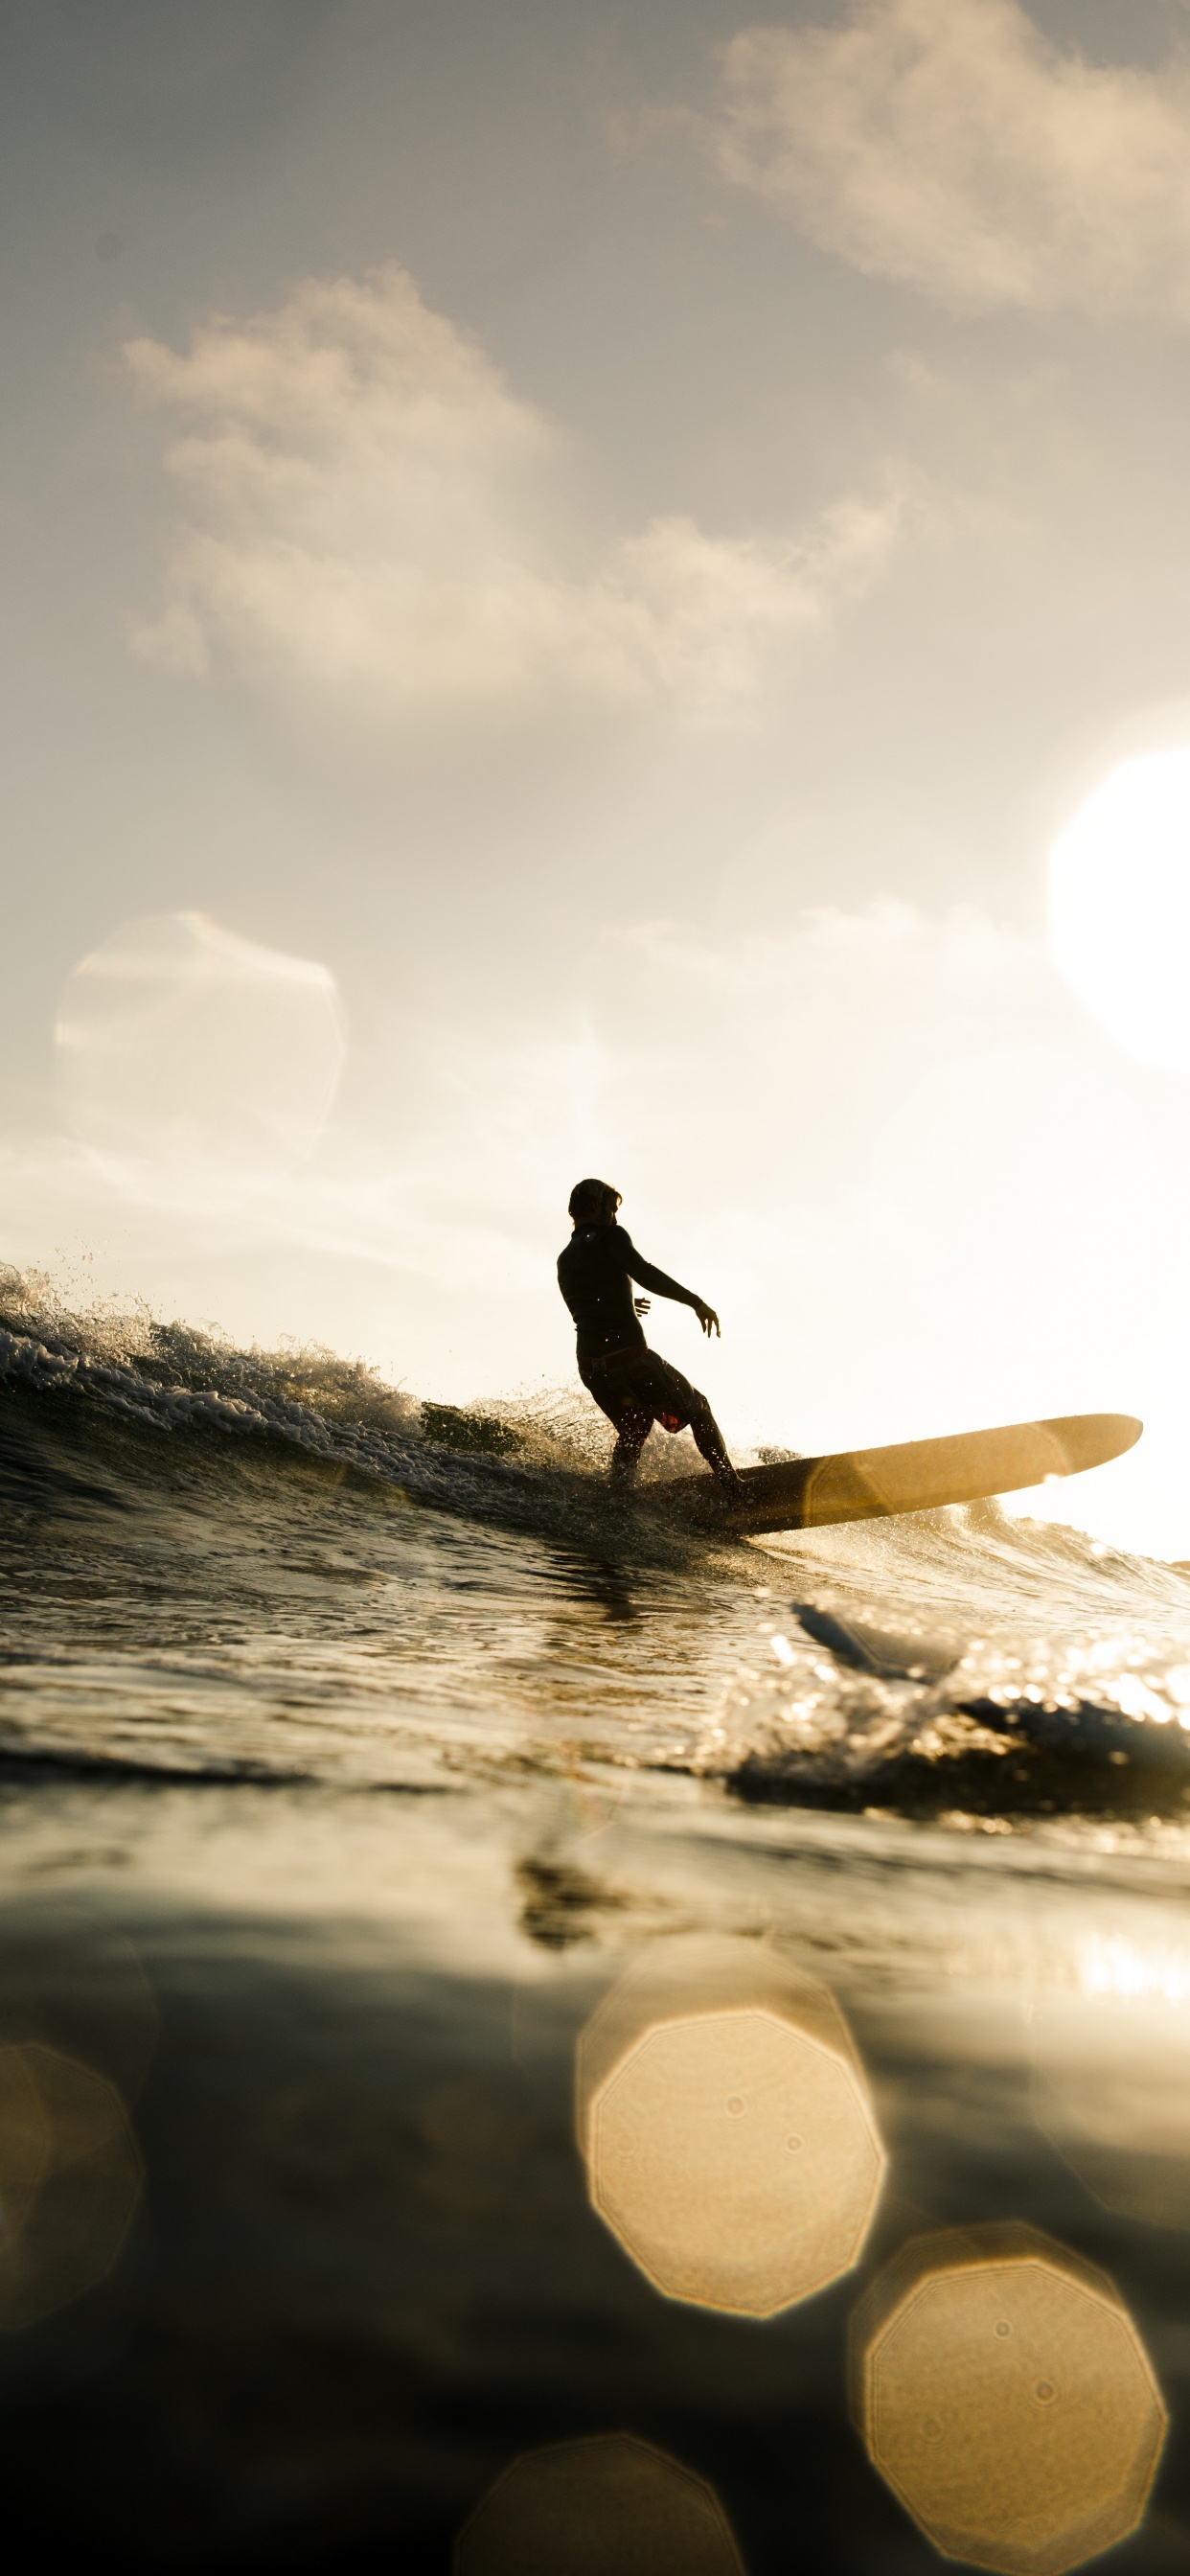 Silhouette of Man Holding Surfboard on Water During Daytime. Wallpaper in 1242x2688 Resolution